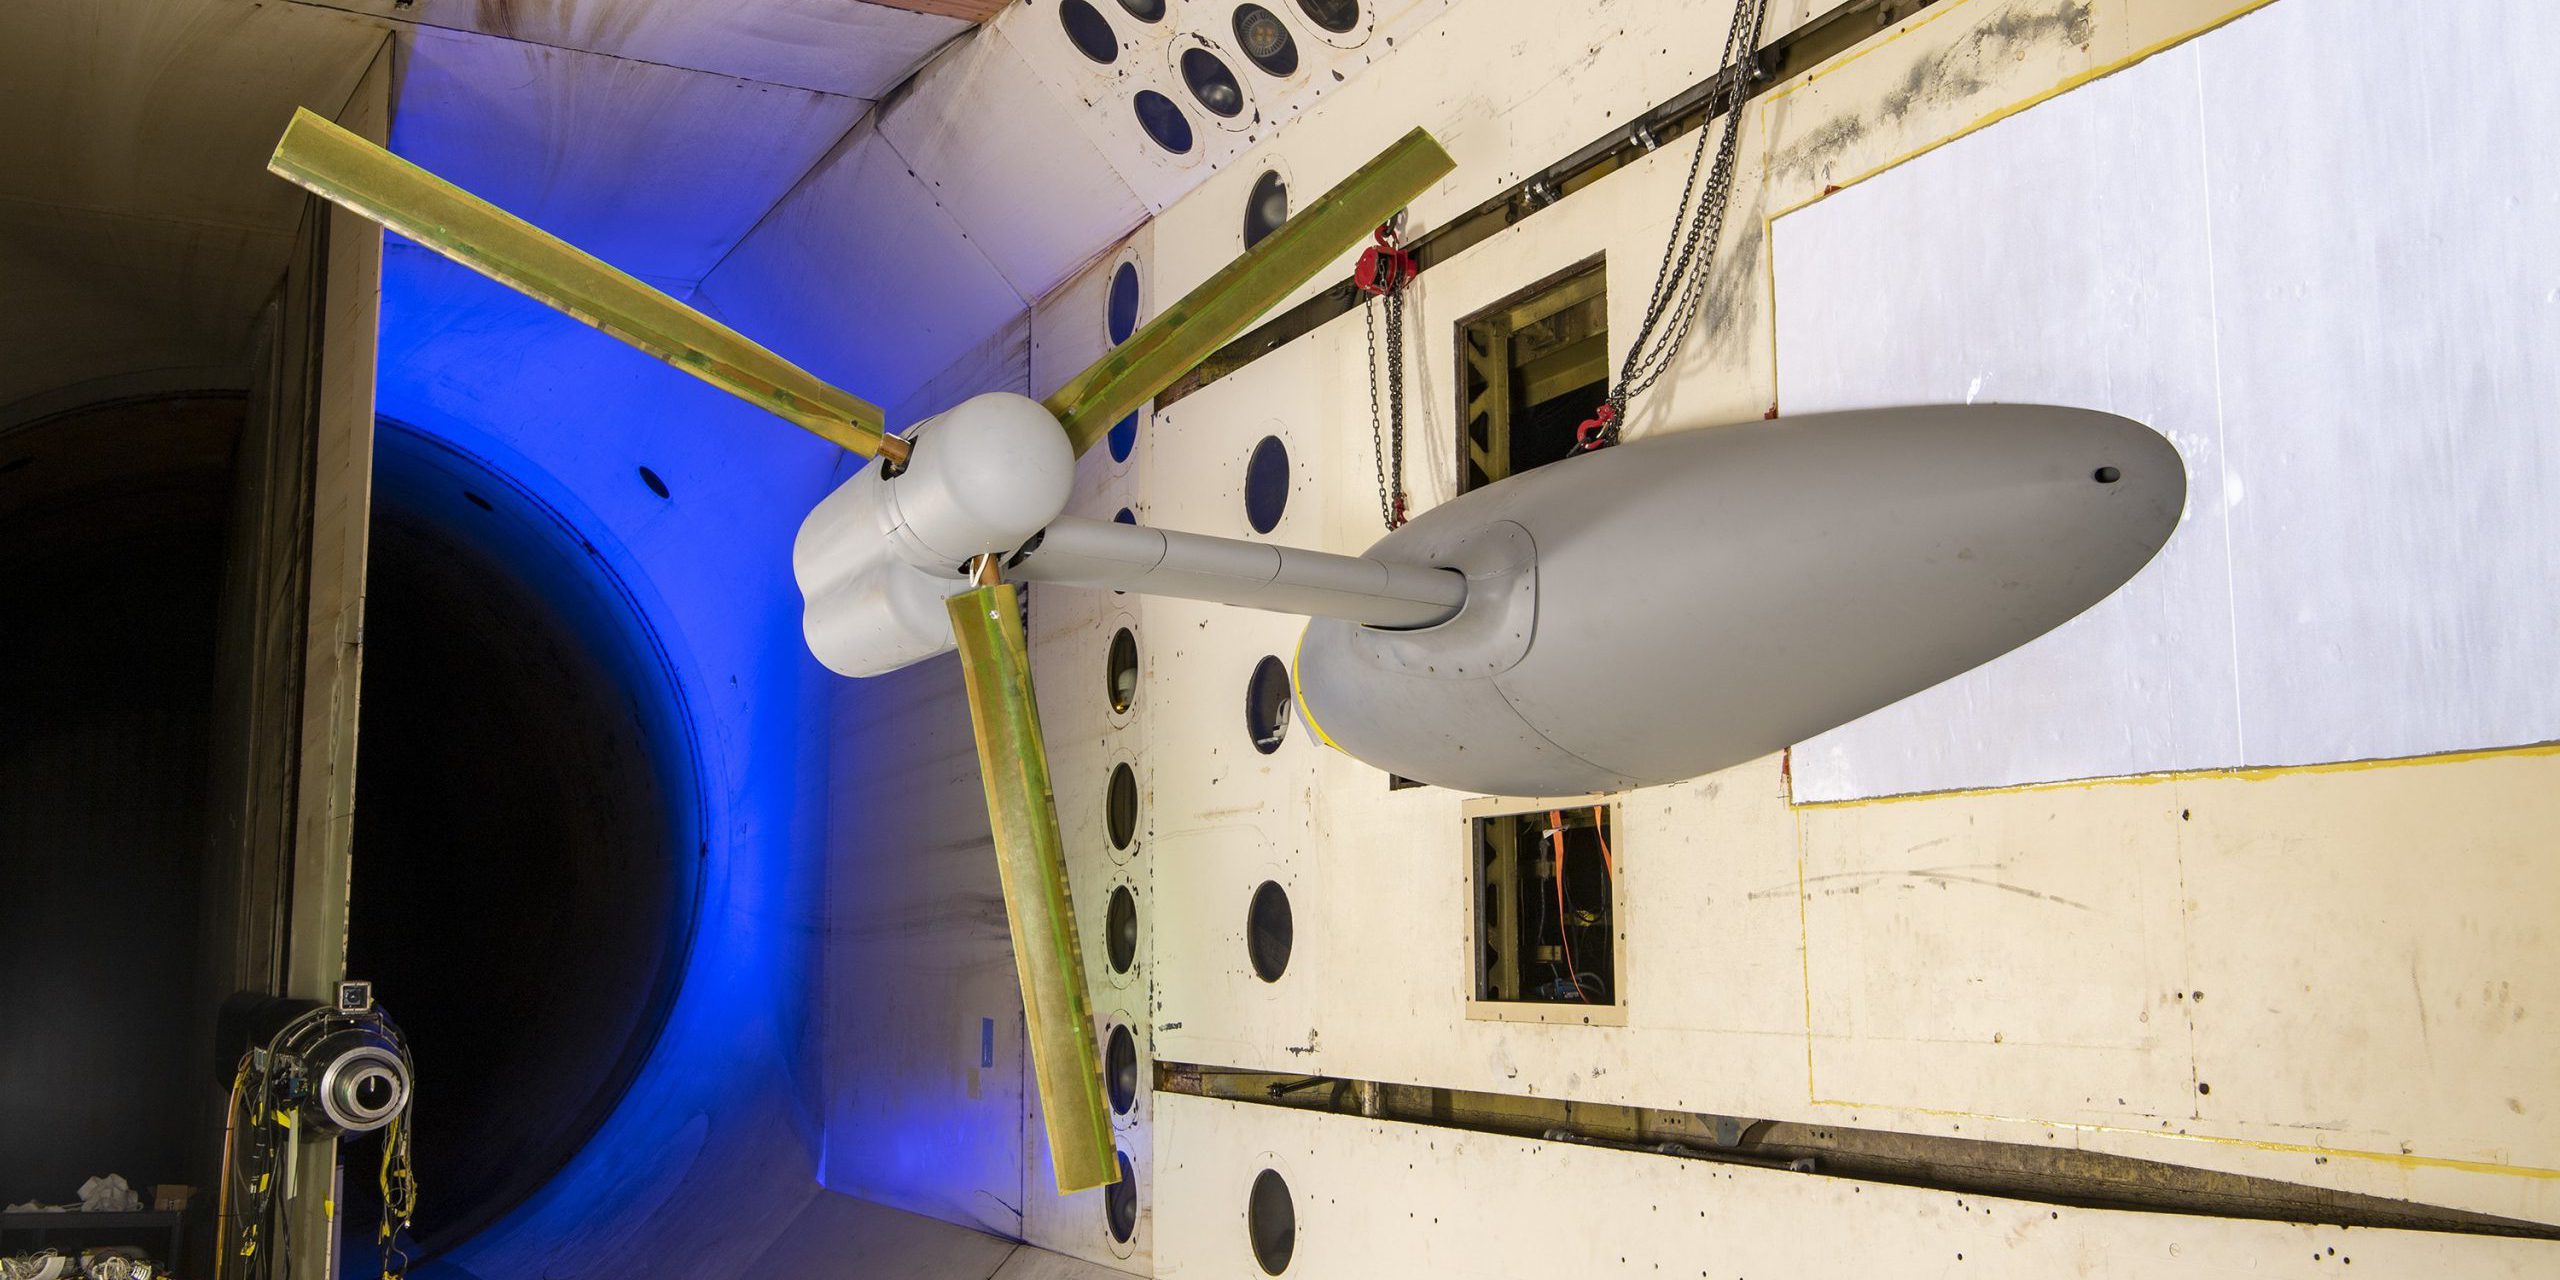 Source: Harlen Capen, NASA, https://www.army.mil/article/241434/wind_tunnel_tests_will_help_design_future_army_tiltrotor_aircraft